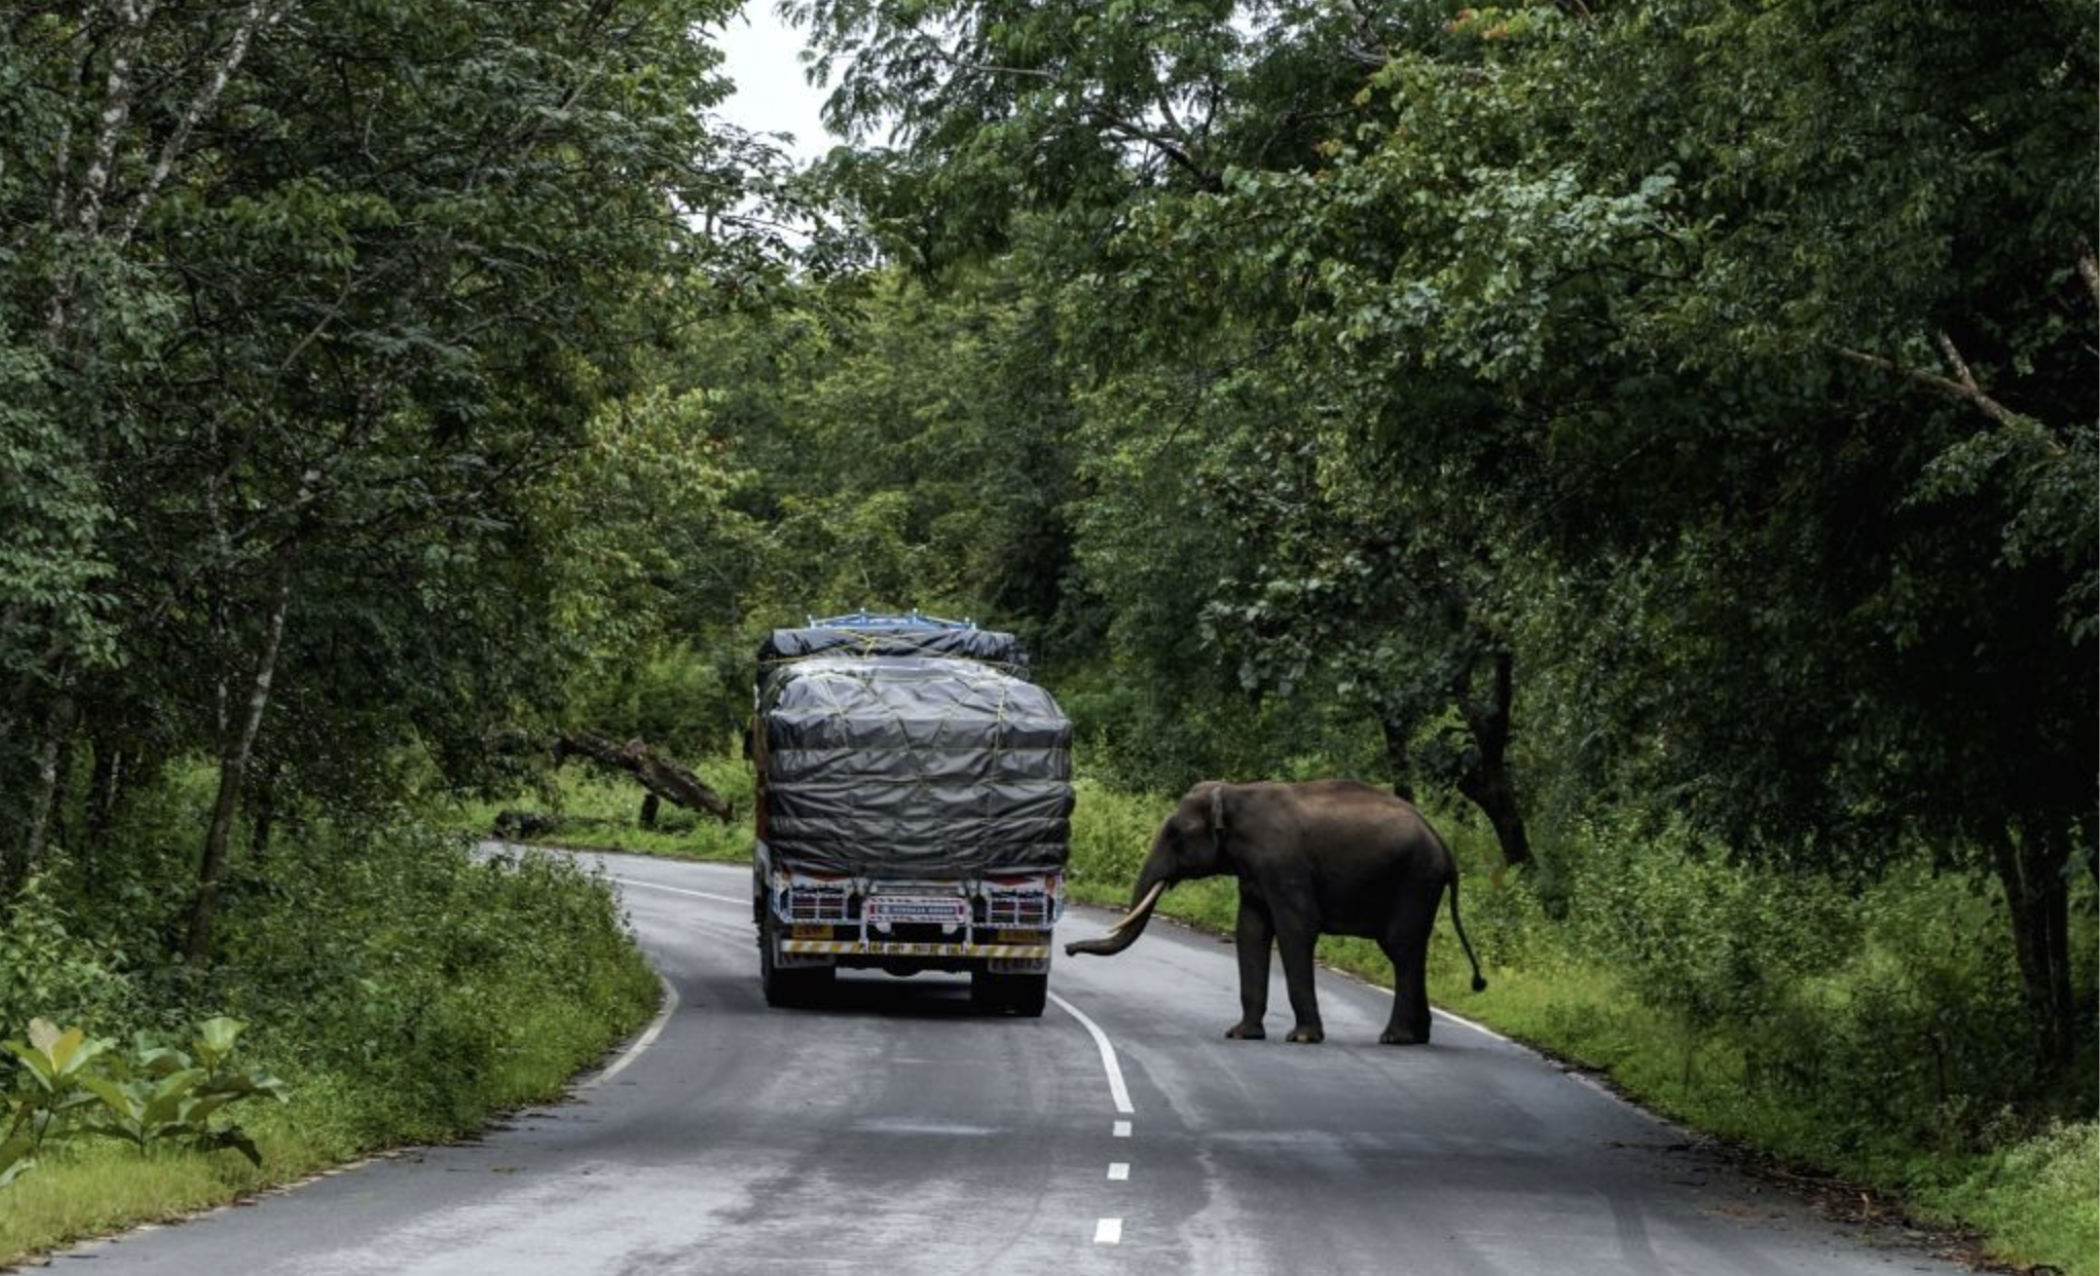 Image of a young tusker crossing NH 766 in the Wayanad Wildlife Sanctuary in Kerala, India